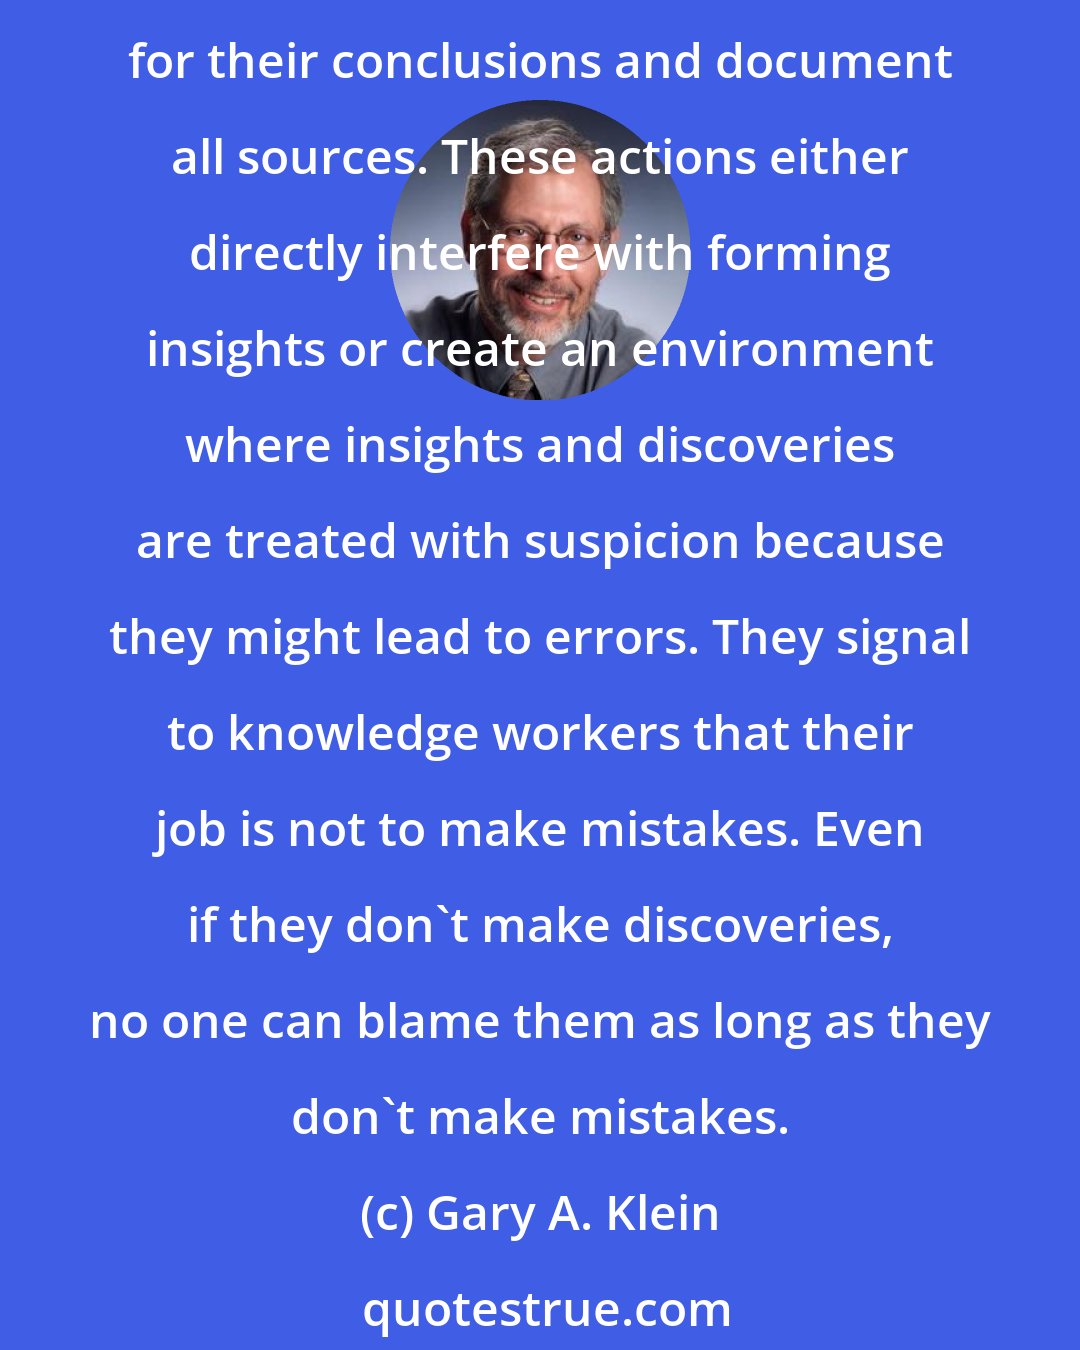 Gary A. Klein: It is instructive to see how organizations pursue their goal of reducing errors and uncertainty. They impose standards, employ checklists, demand that knowledge workers list assumptions for their conclusions and document all sources. These actions either directly interfere with forming insights or create an environment where insights and discoveries are treated with suspicion because they might lead to errors. They signal to knowledge workers that their job is not to make mistakes. Even if they don't make discoveries, no one can blame them as long as they don't make mistakes.